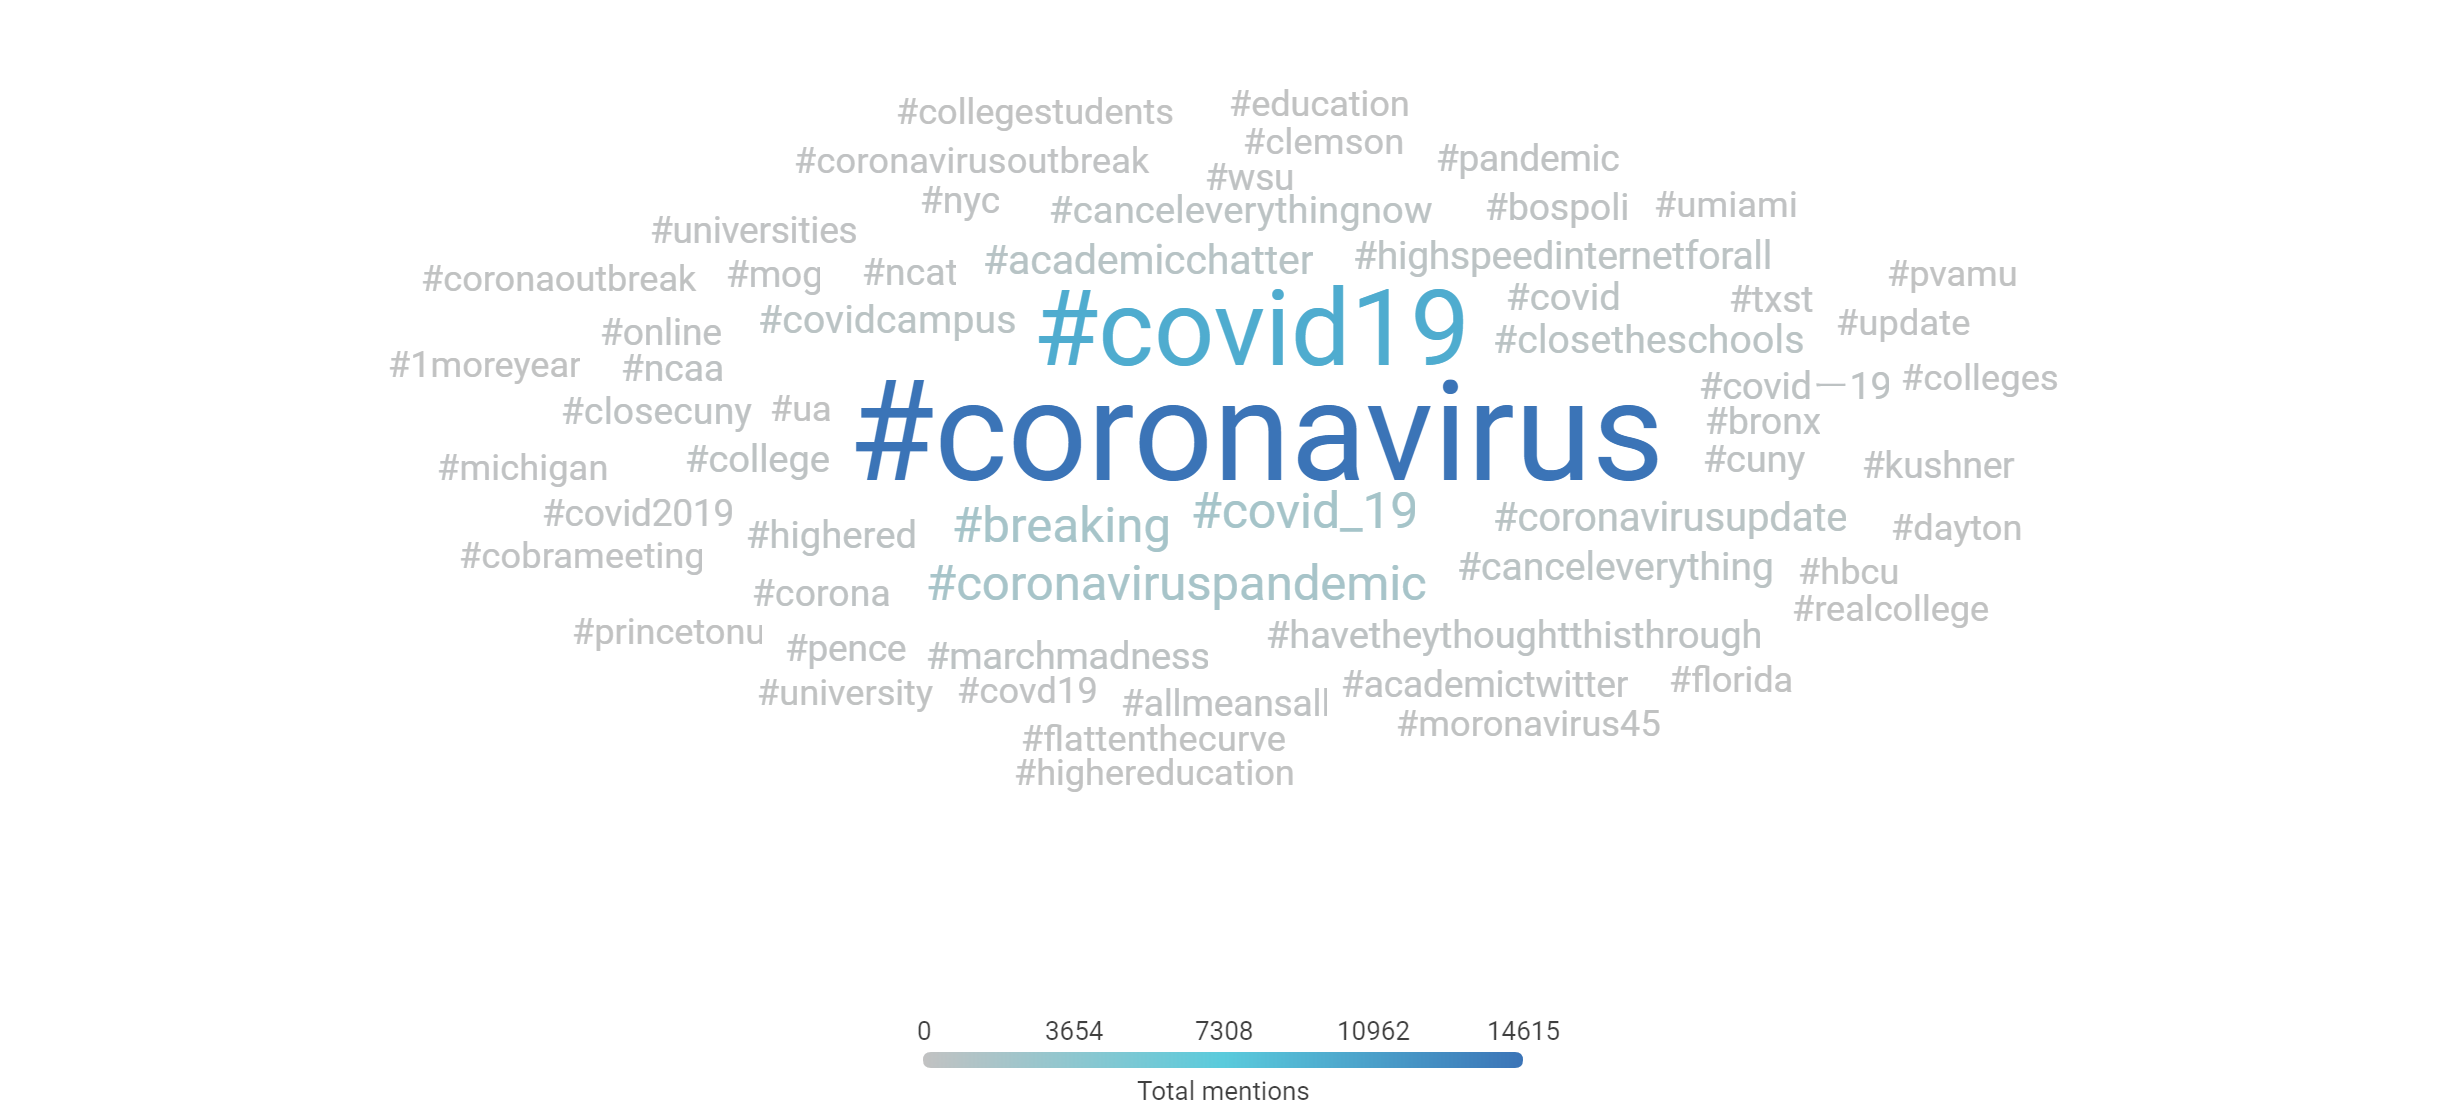 3.13 Briefing Higher Ed Focused Hashtag Cloud with #covid19 and #coronavirus the most common topics